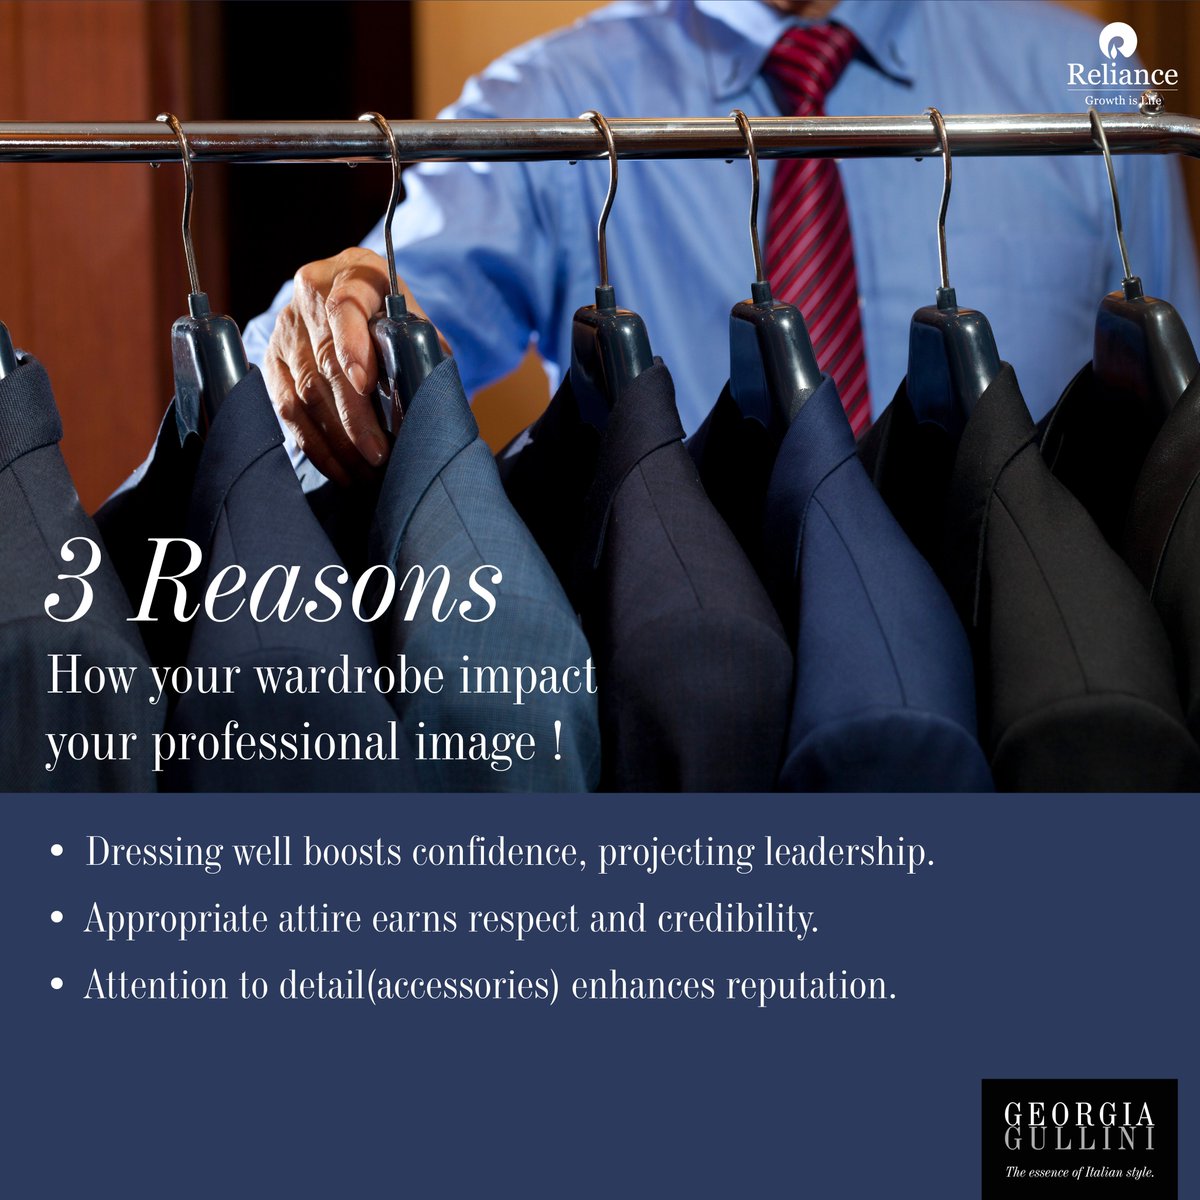 Suit up for success: because your wardrobe isn't just about style, it's about making a statement. Your professional image starts with what you wear. #DressForSuccess #ProfessionalImage #SuitUp #GeorgiaGullini #Reliance #RelianceIndustries #RelianceTextiles